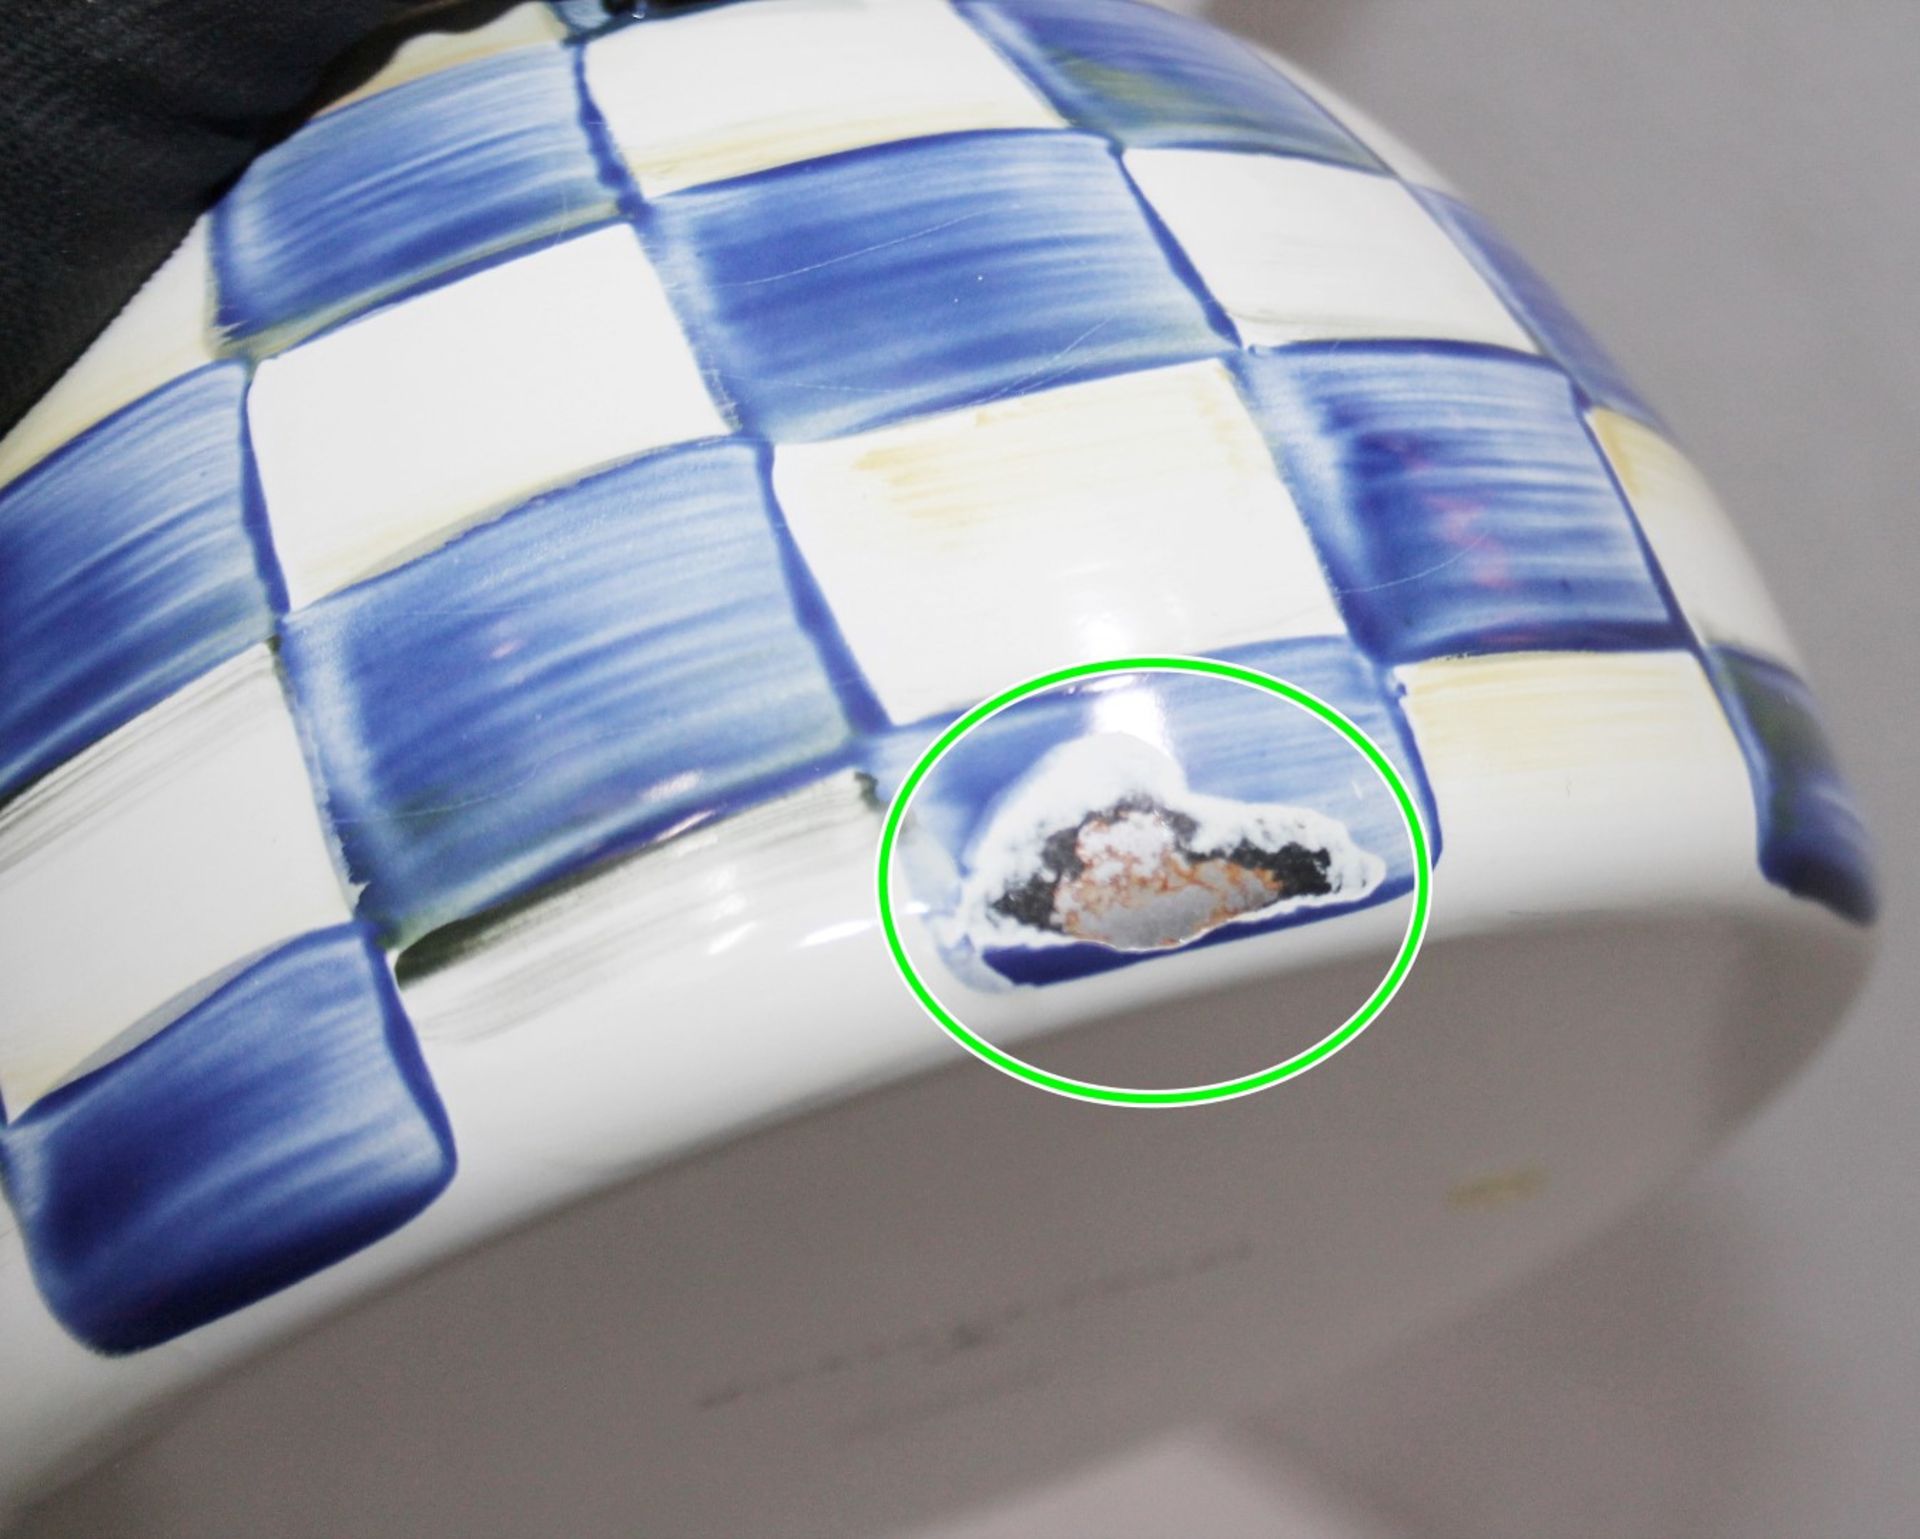 1 x MACKENZIE-CHILDS 'Royal Check' Hand-painted Tea Kettle - Original Price £153.00 - Image 5 of 12